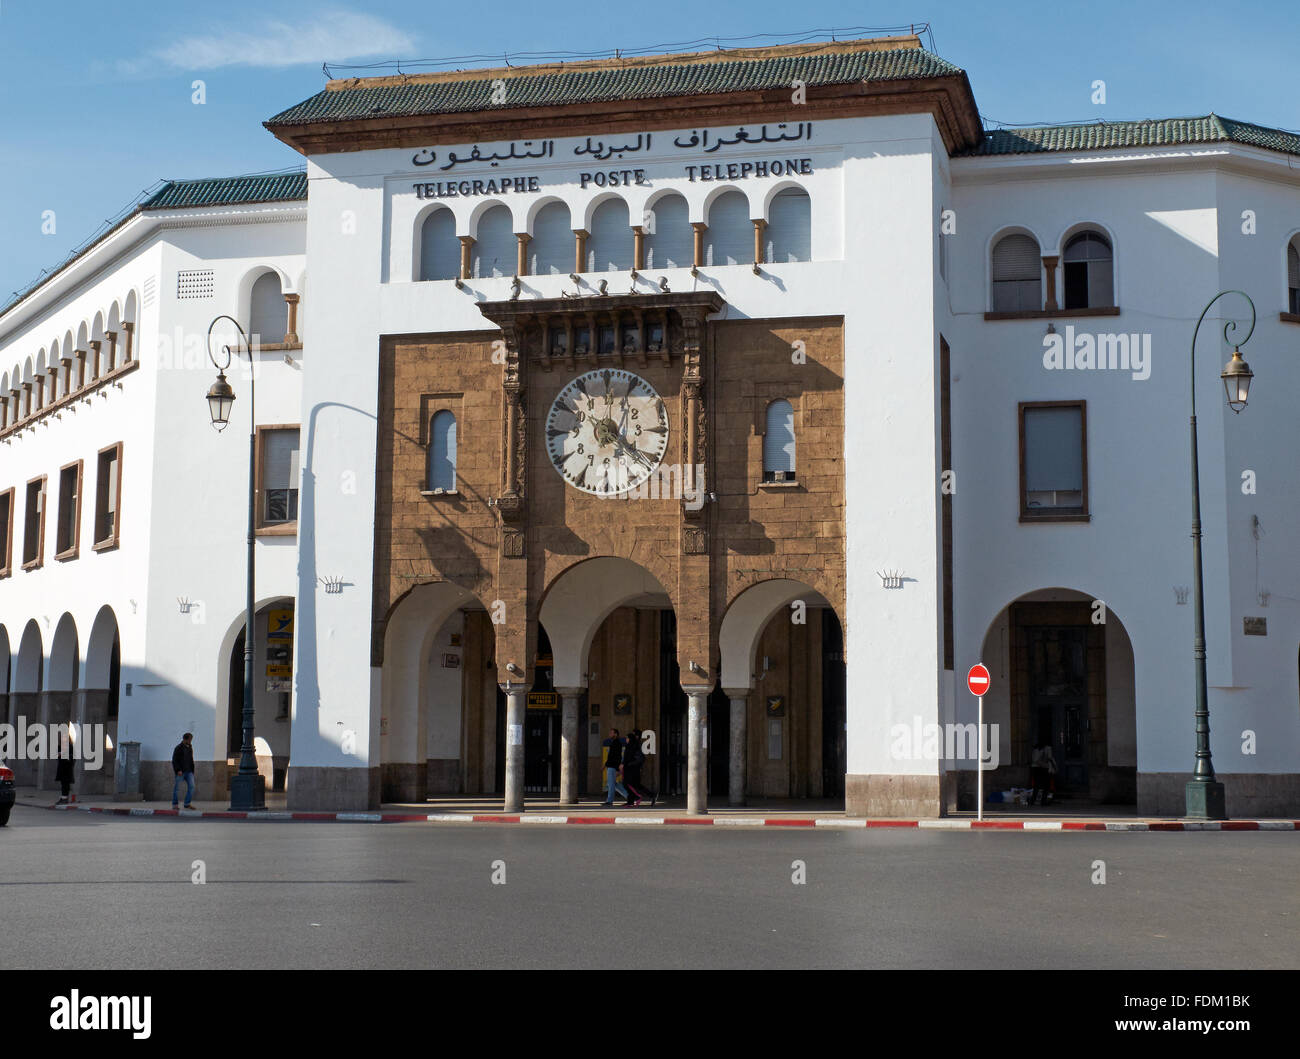 Main post, telegraph and telephone office of Rabat. Morocco. Stock Photo